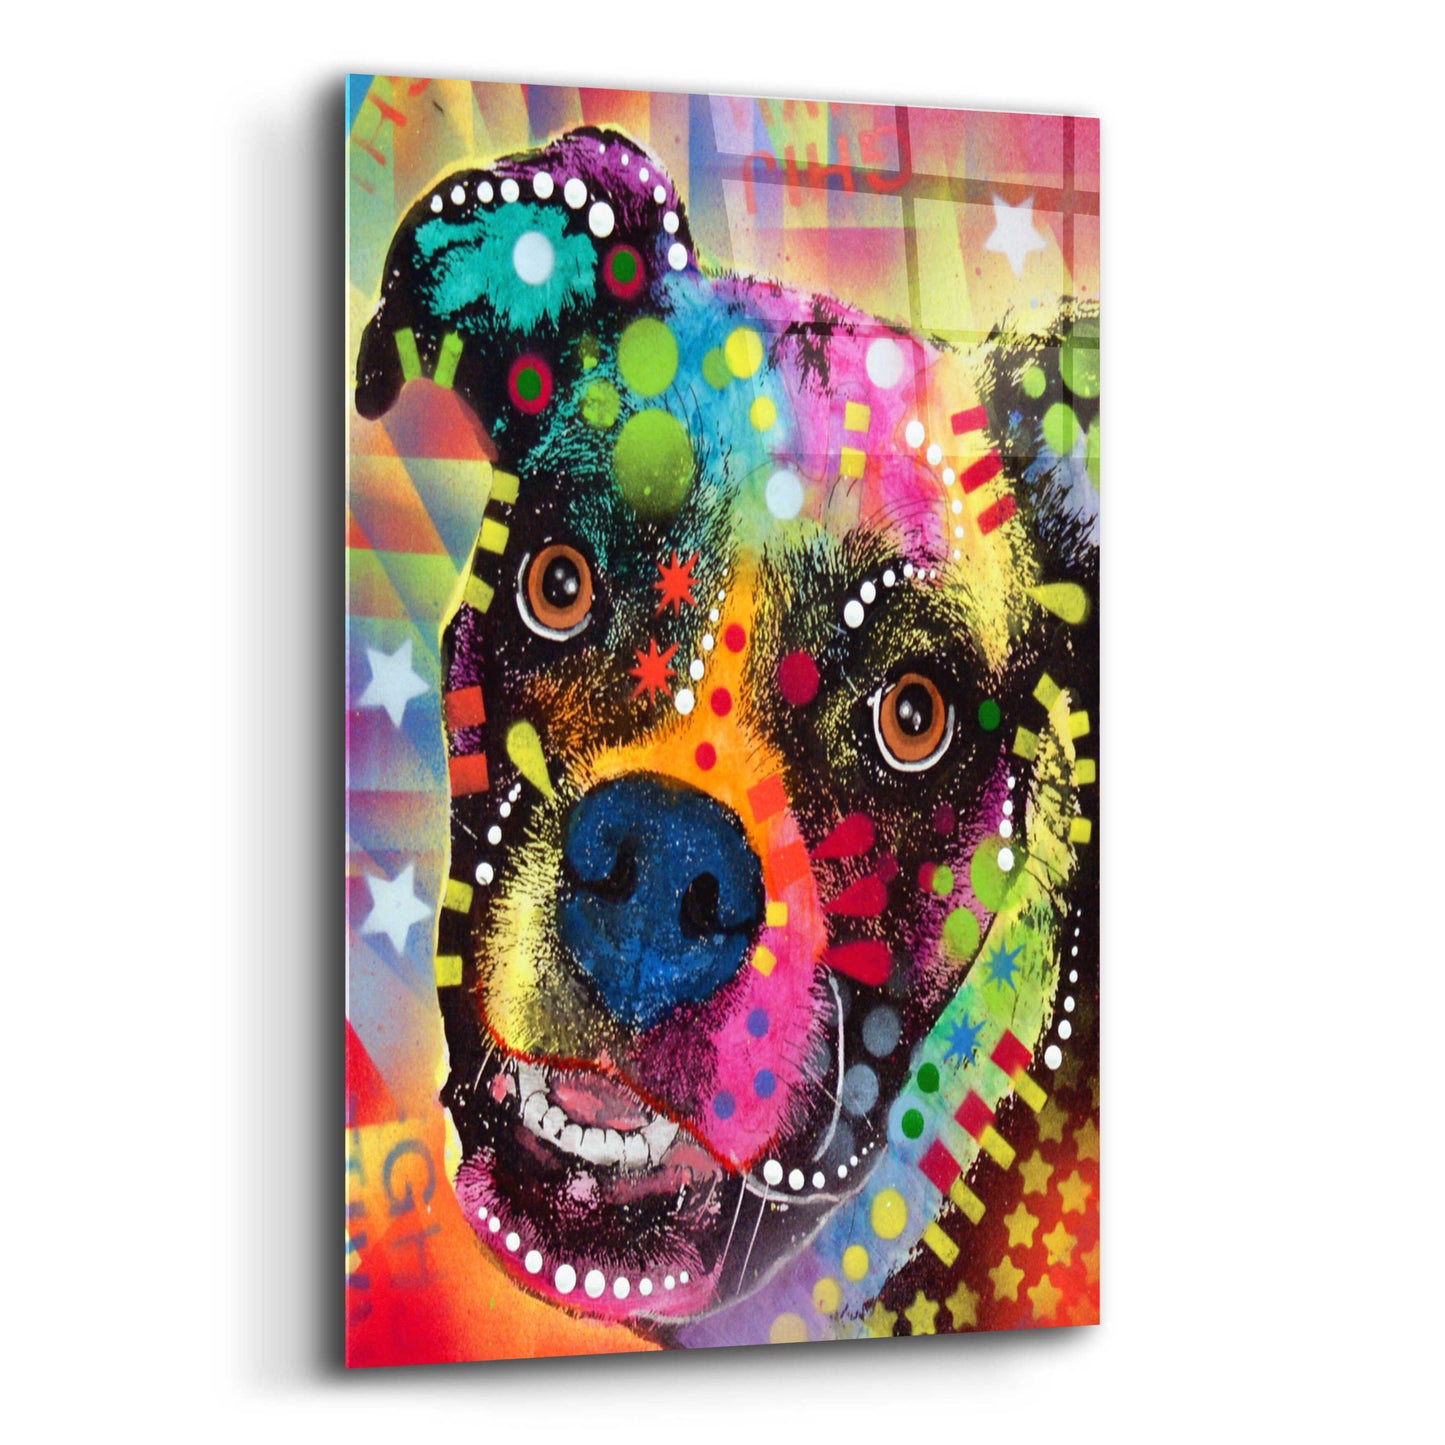 Epic Art 'Boxer Cubism 2' by Dean Russo, Acrylic Glass Wall Art,12x16